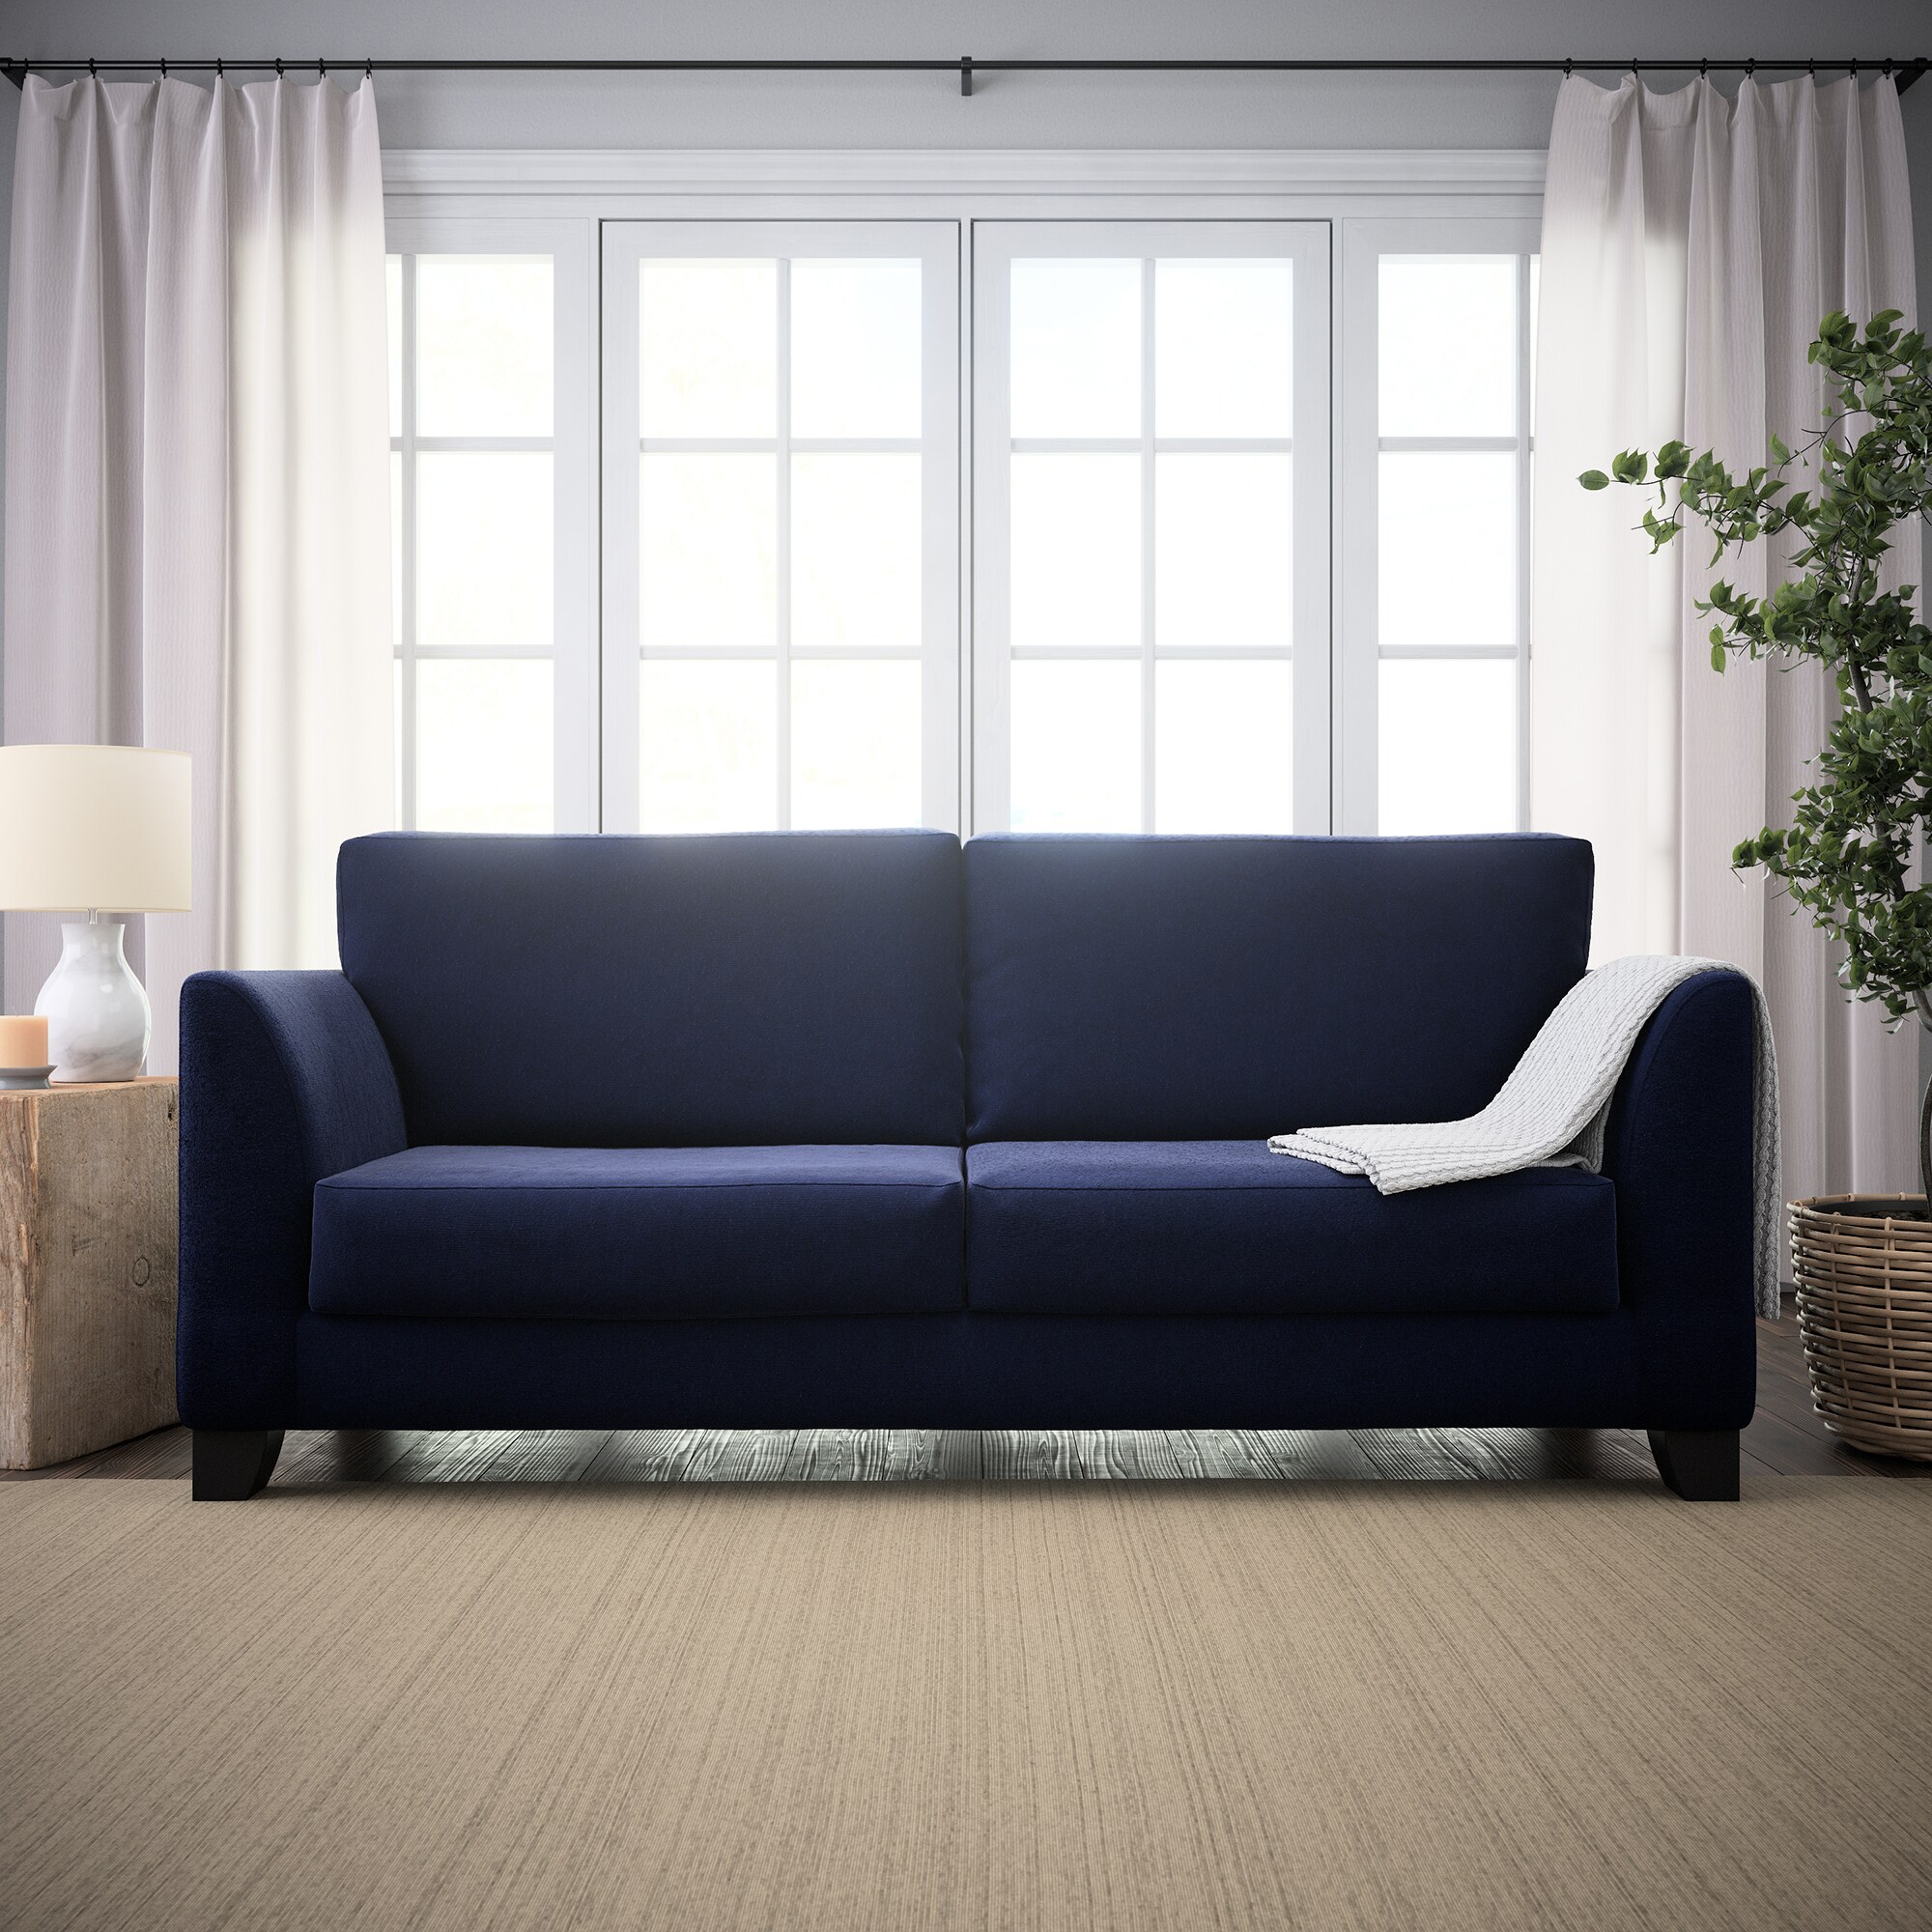 Brookside Holly Modern Navy Polyester/Blend Sofa in Blue | BS0006SOF00NV